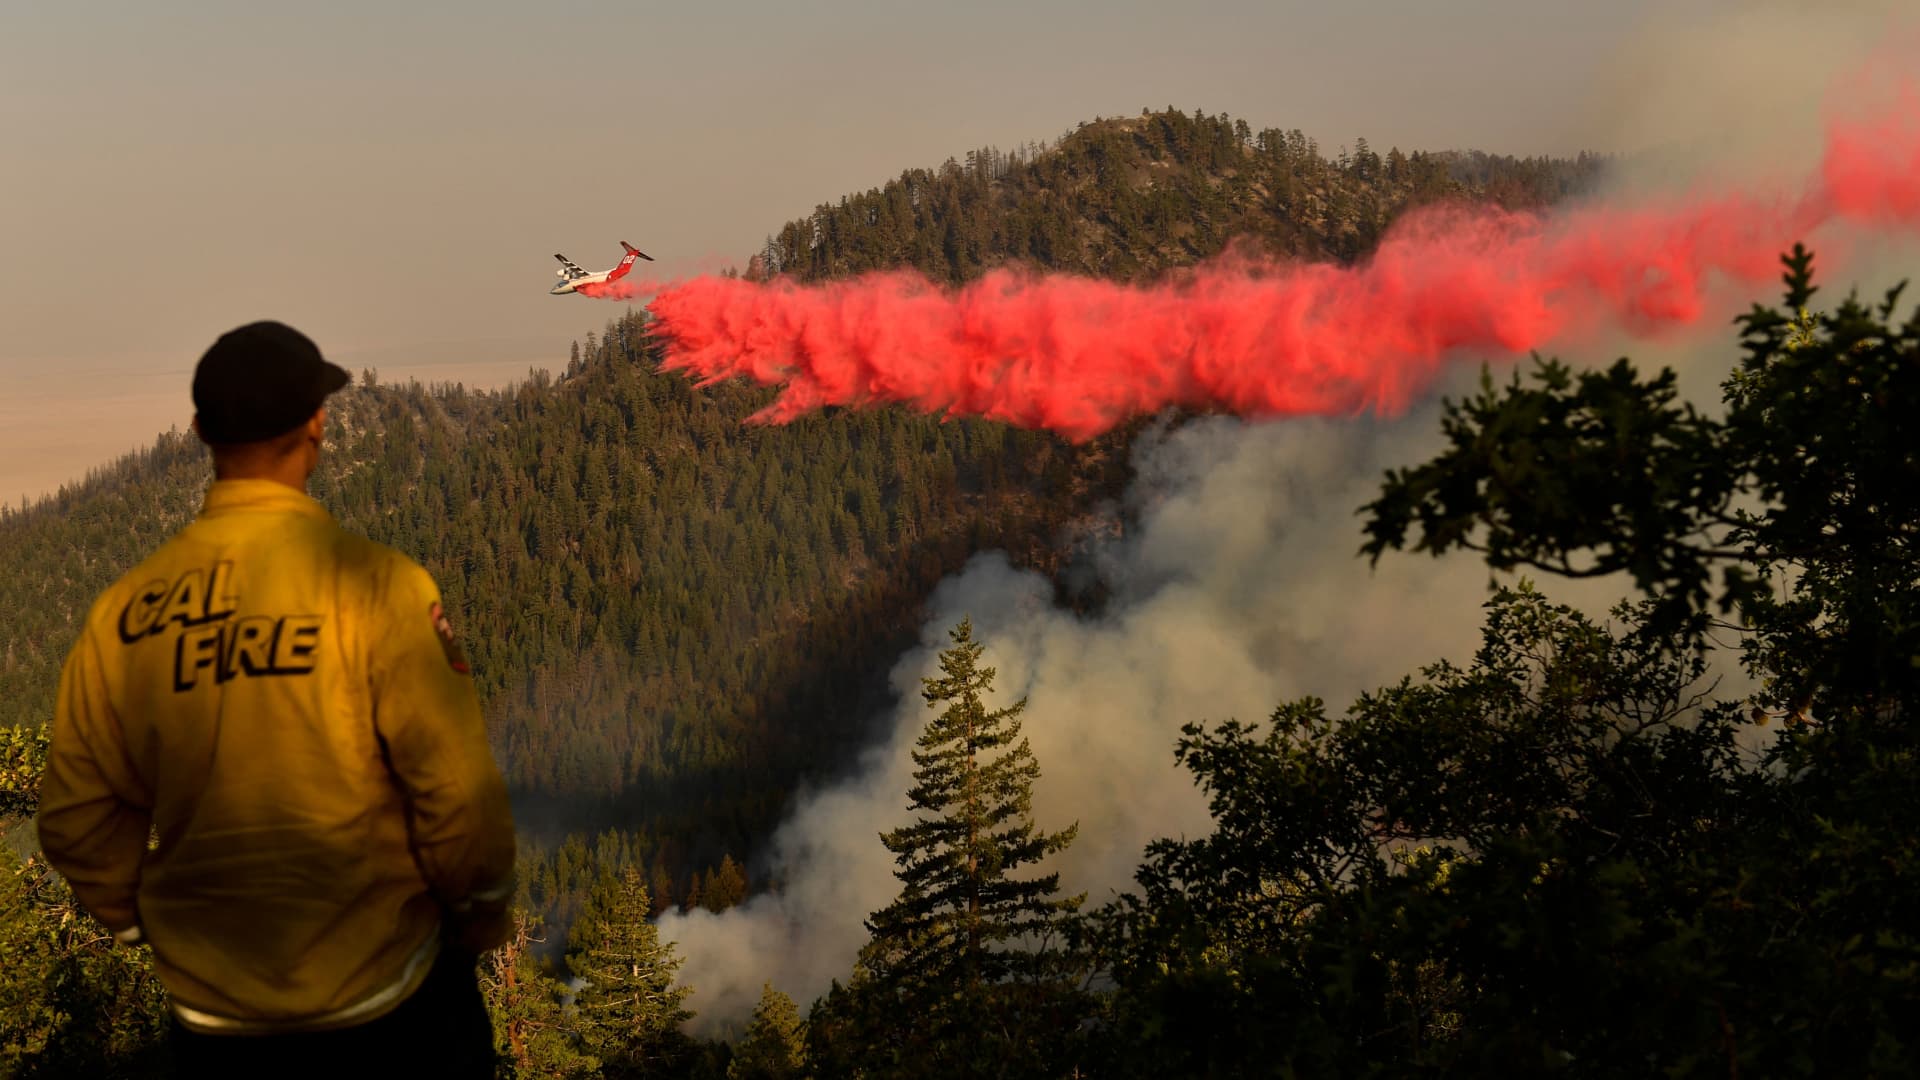 A Cal Fire firefighter from the Lassen-Modoc Unit watches as an air tanker makes a fire retardant drop on the Dixie Fire as trees burn on a hillside on August 18, 2021 near Janesville, California.